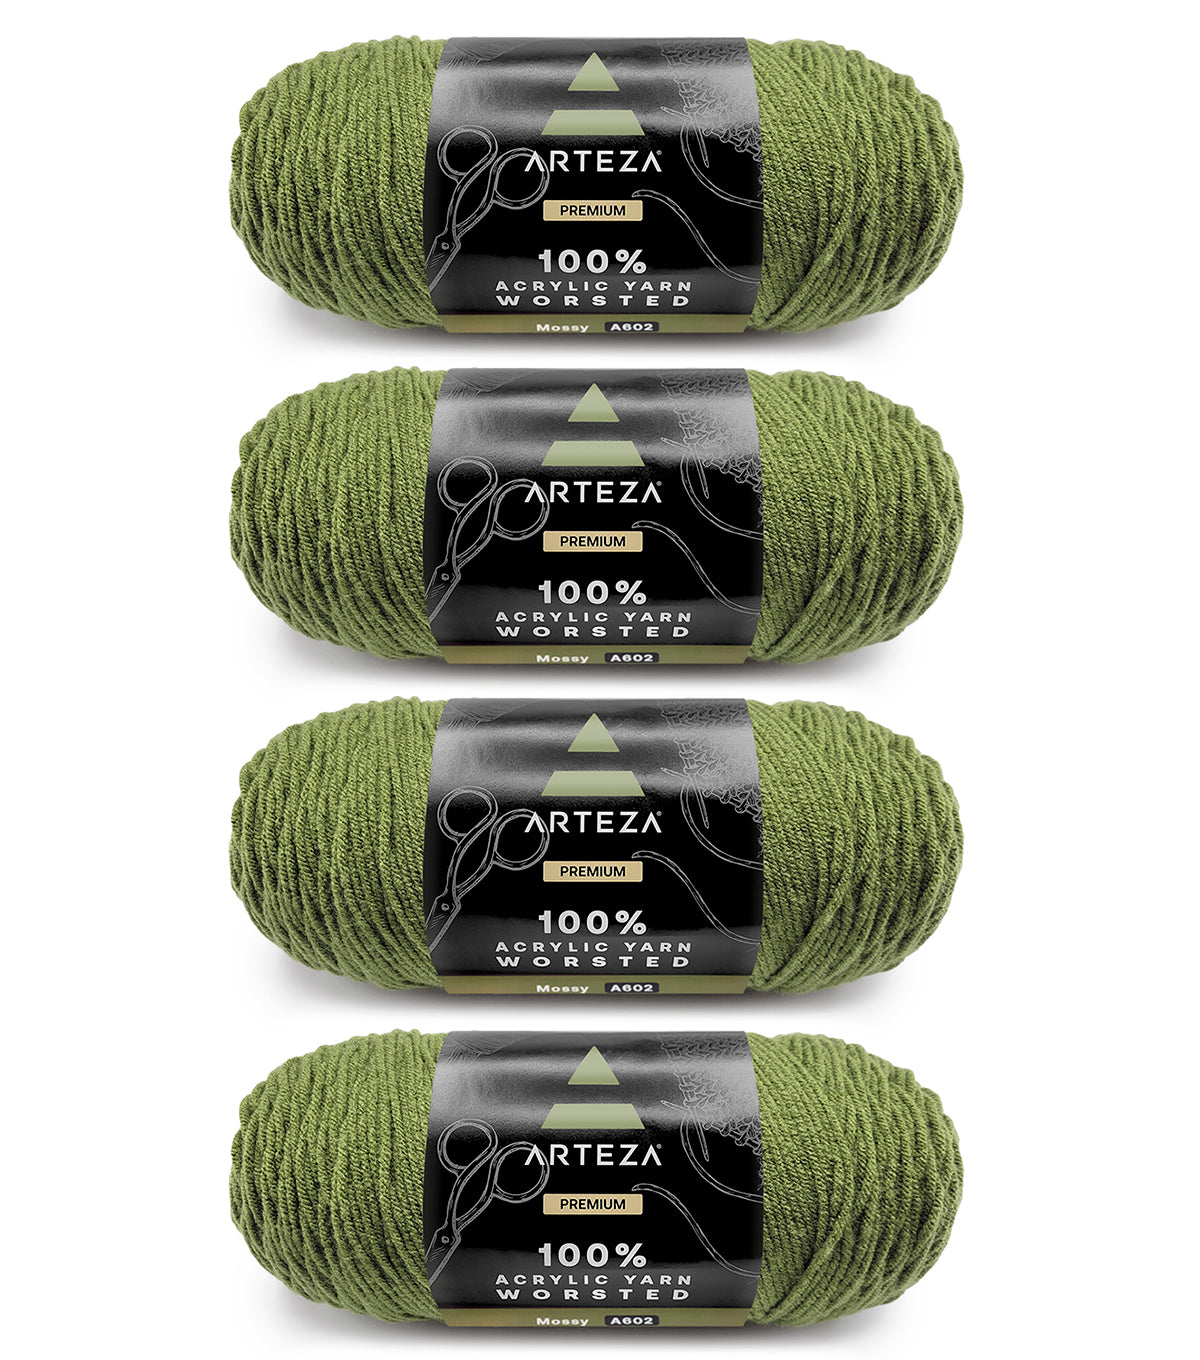 Mainstays Home 4 Ply Worsted Weight Yarn 100% Acrylic 8 oz. 01620 Soft  Yellow